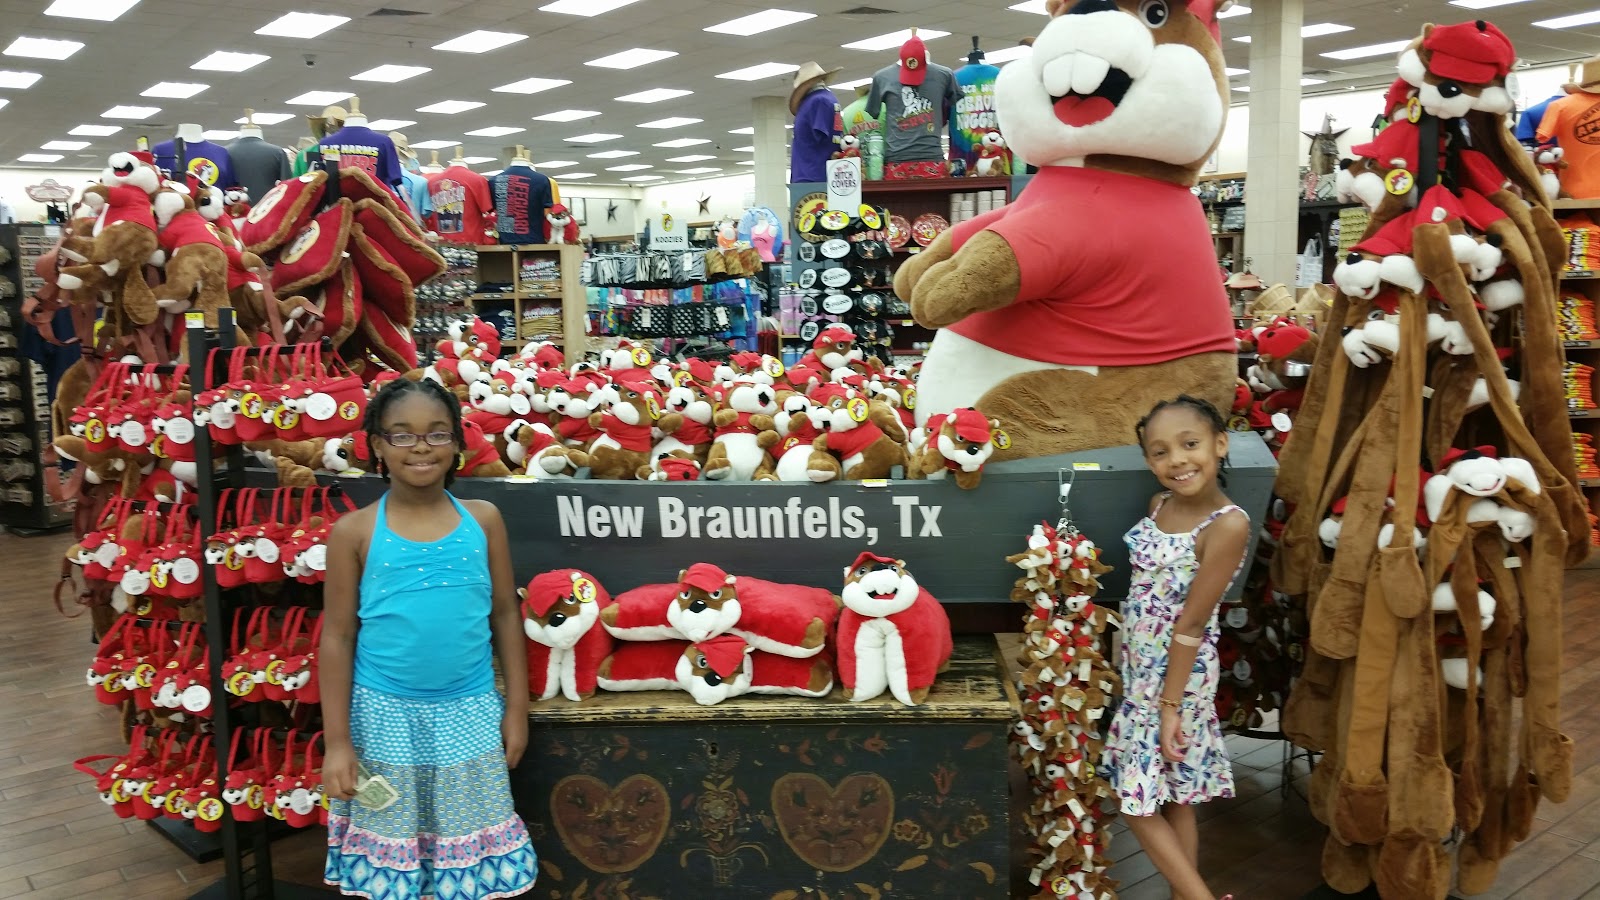 My Epic Family Road Trip Vacation! #RoadTrip #Bucees via ProductReviewMom.com